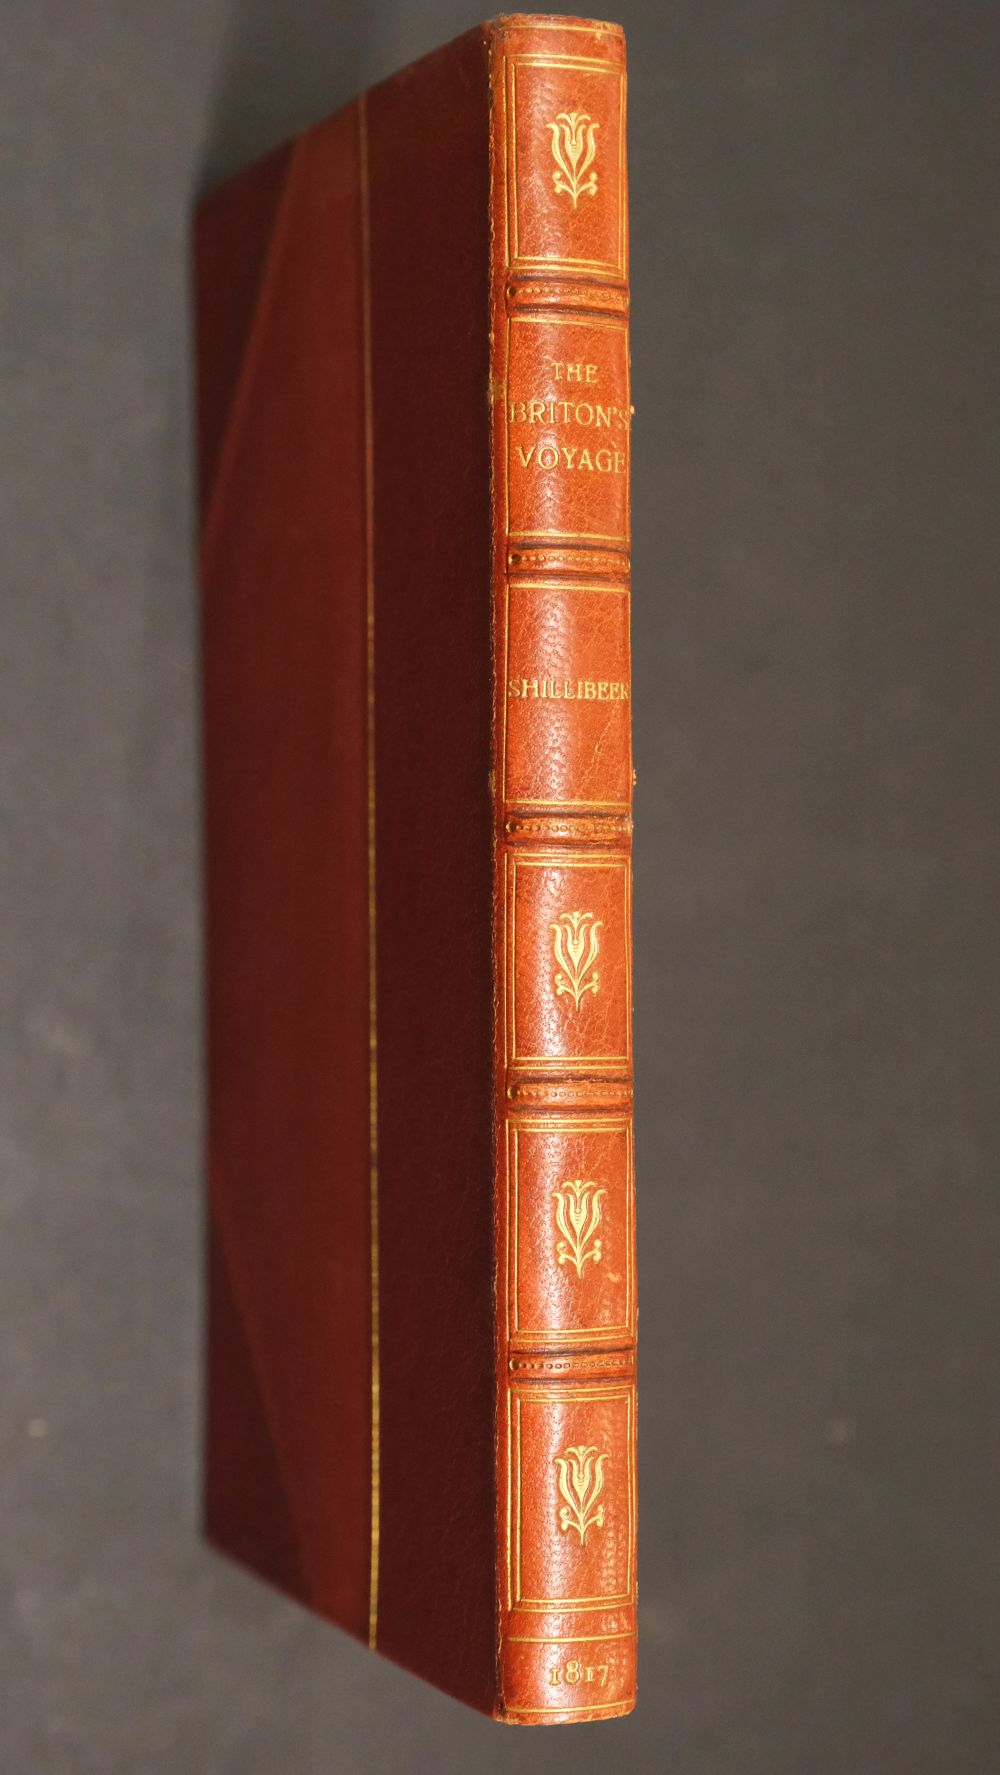 Shillibeer (John). A Narrative of the Briton's Voyage, to Pitcairn's Island, 1817 - Image 3 of 18